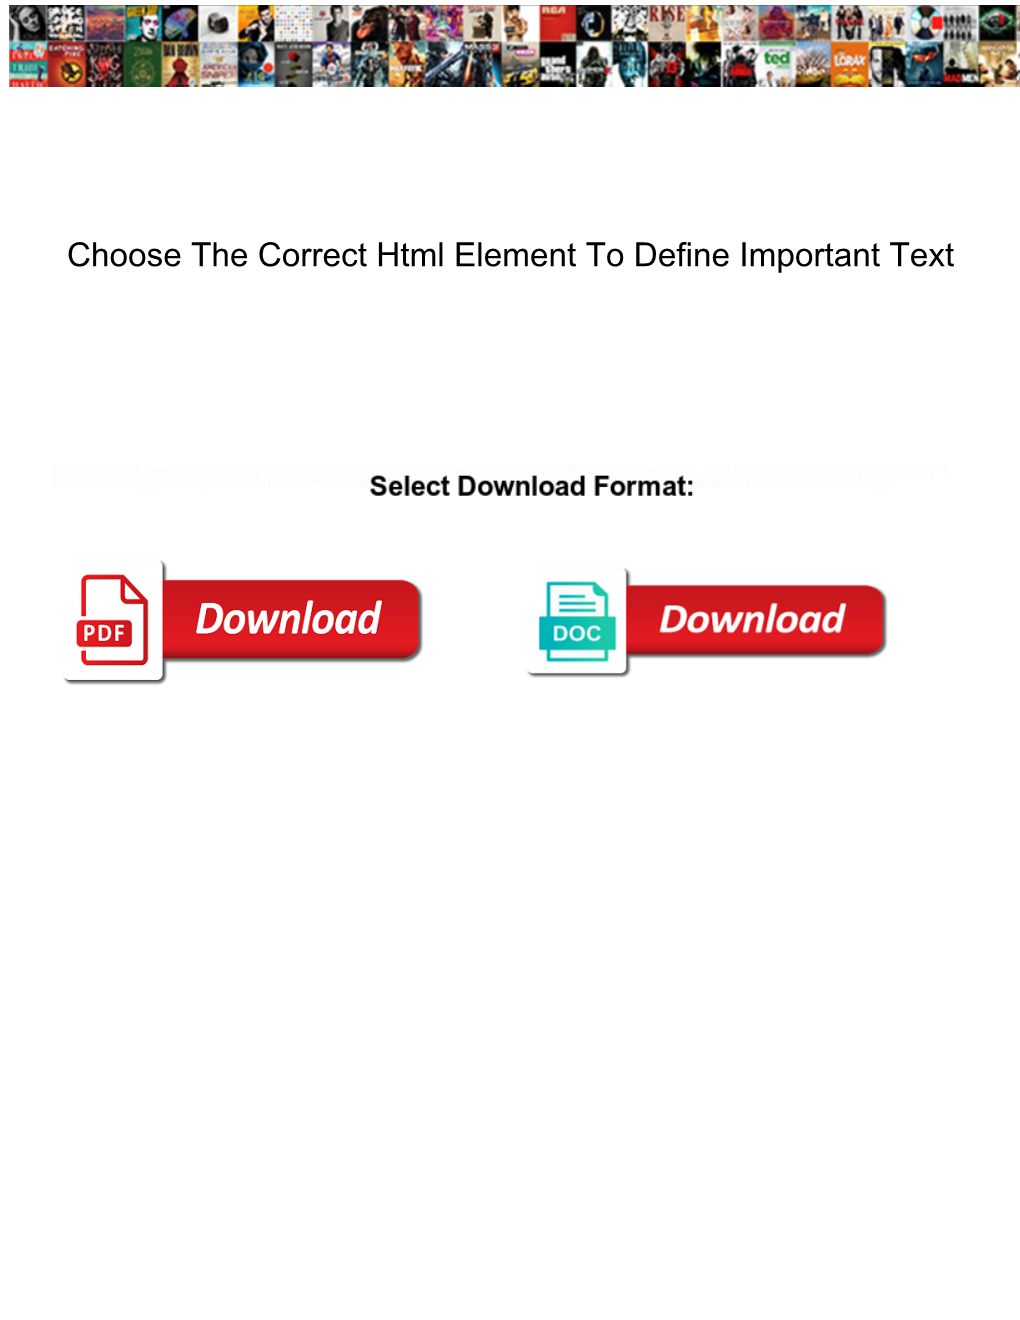 Choose the Correct Html Element to Define Important Text